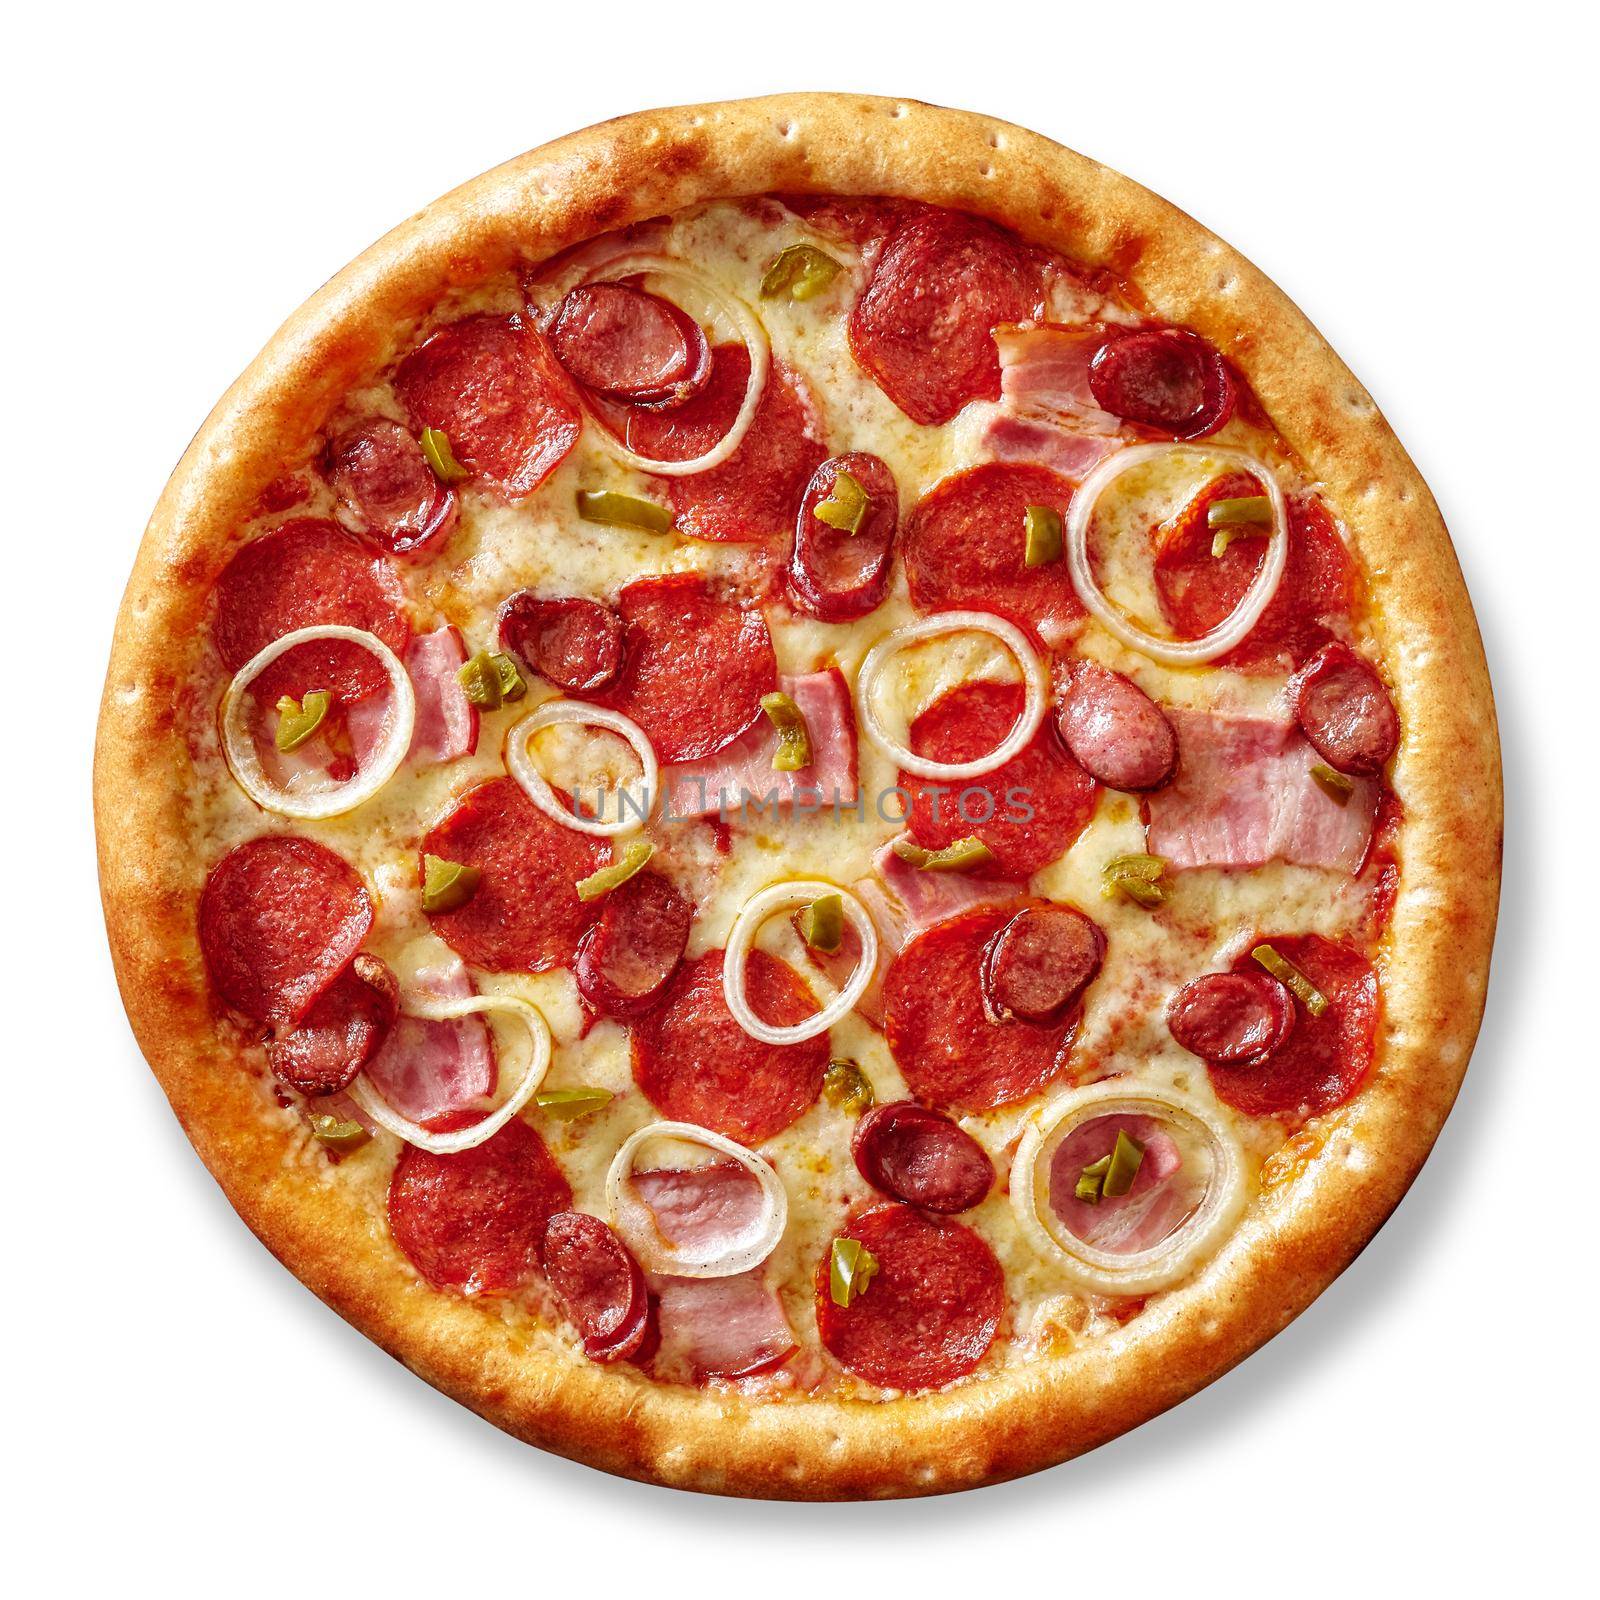 Top view of appetizing browned meat pizza with bacon, salami, hunting sausages, jalapeno and onions on layer of pelati sauce and melted mozzarella isolated on white background. Italian cuisine